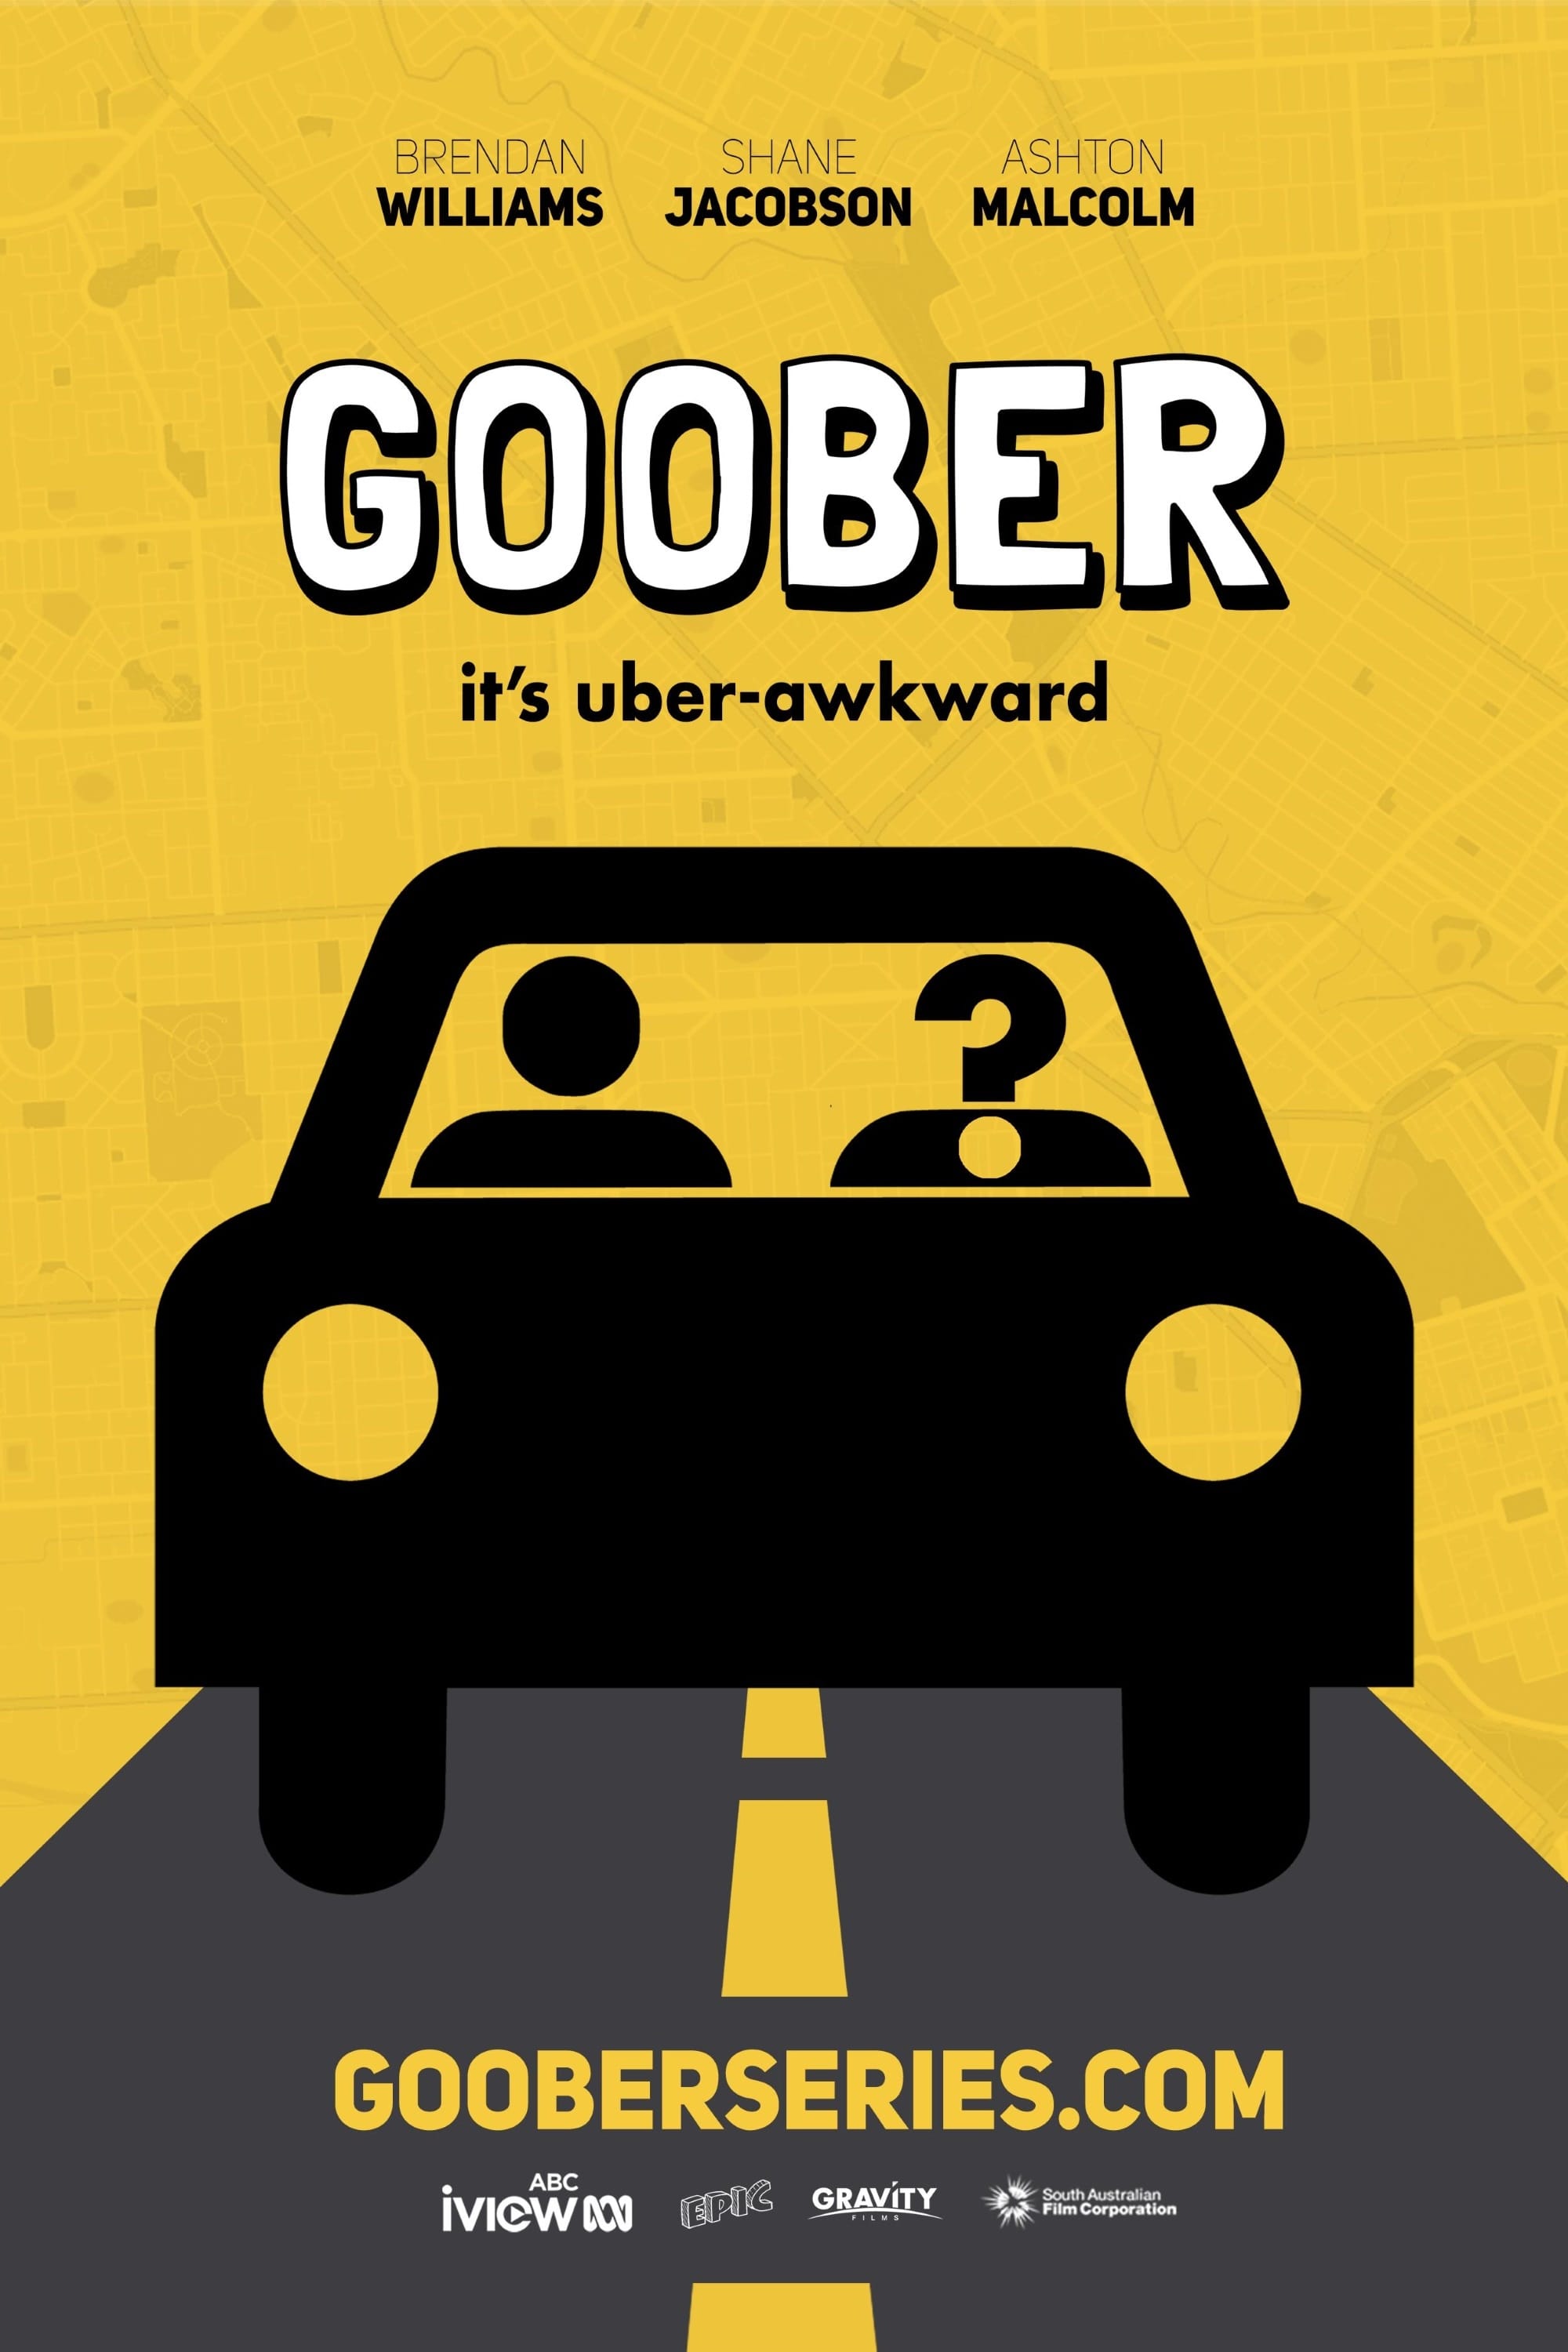 Goober TV Shows About Autism